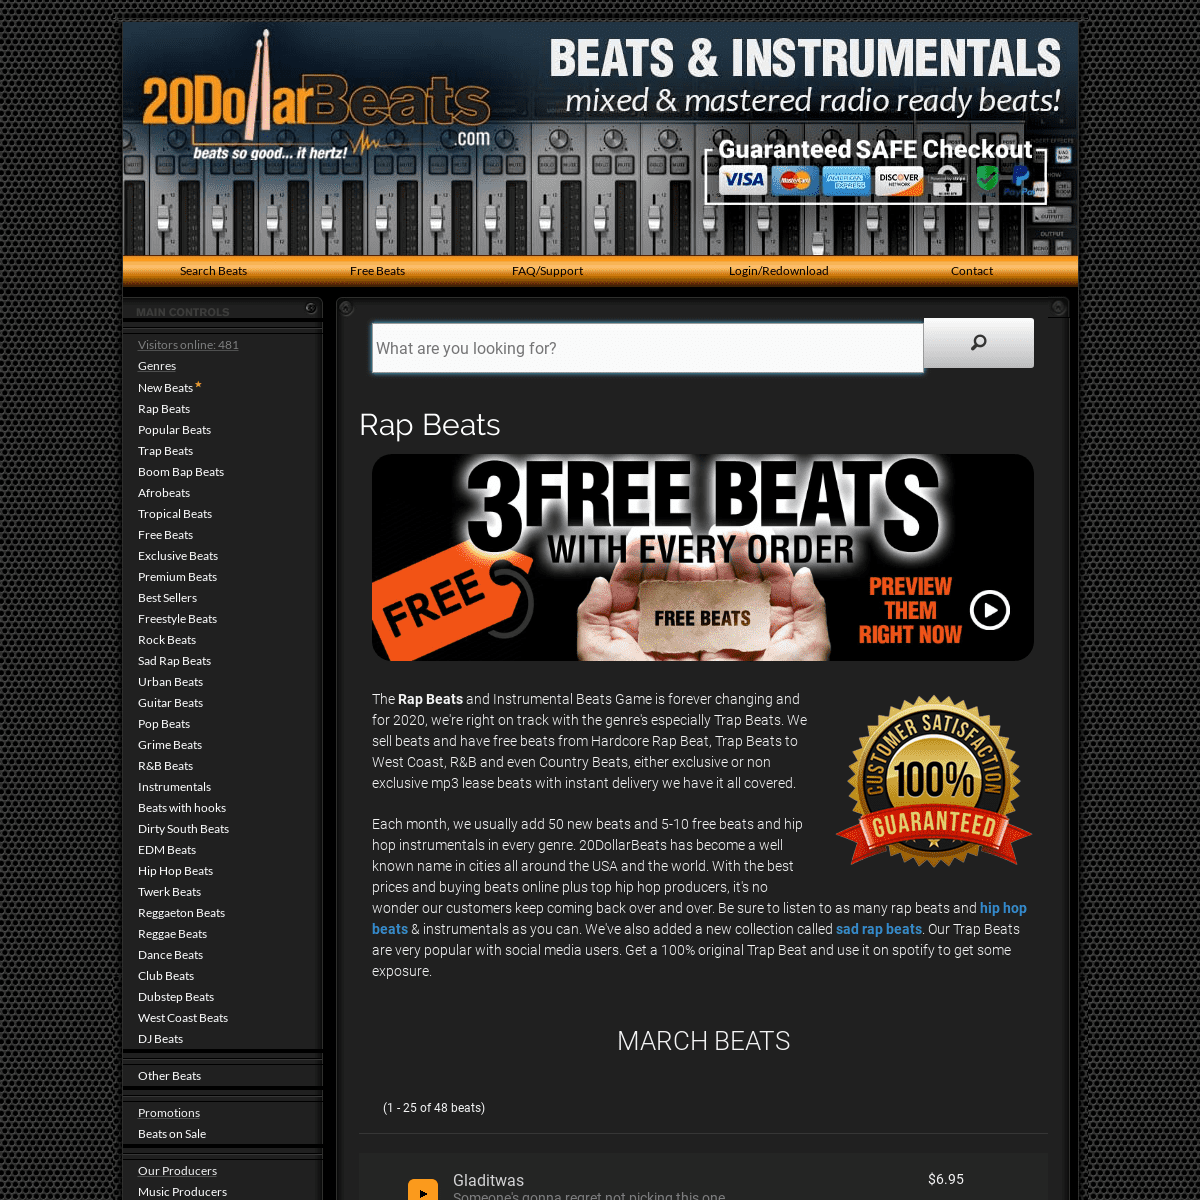 A complete backup of 20dollarbeats.com